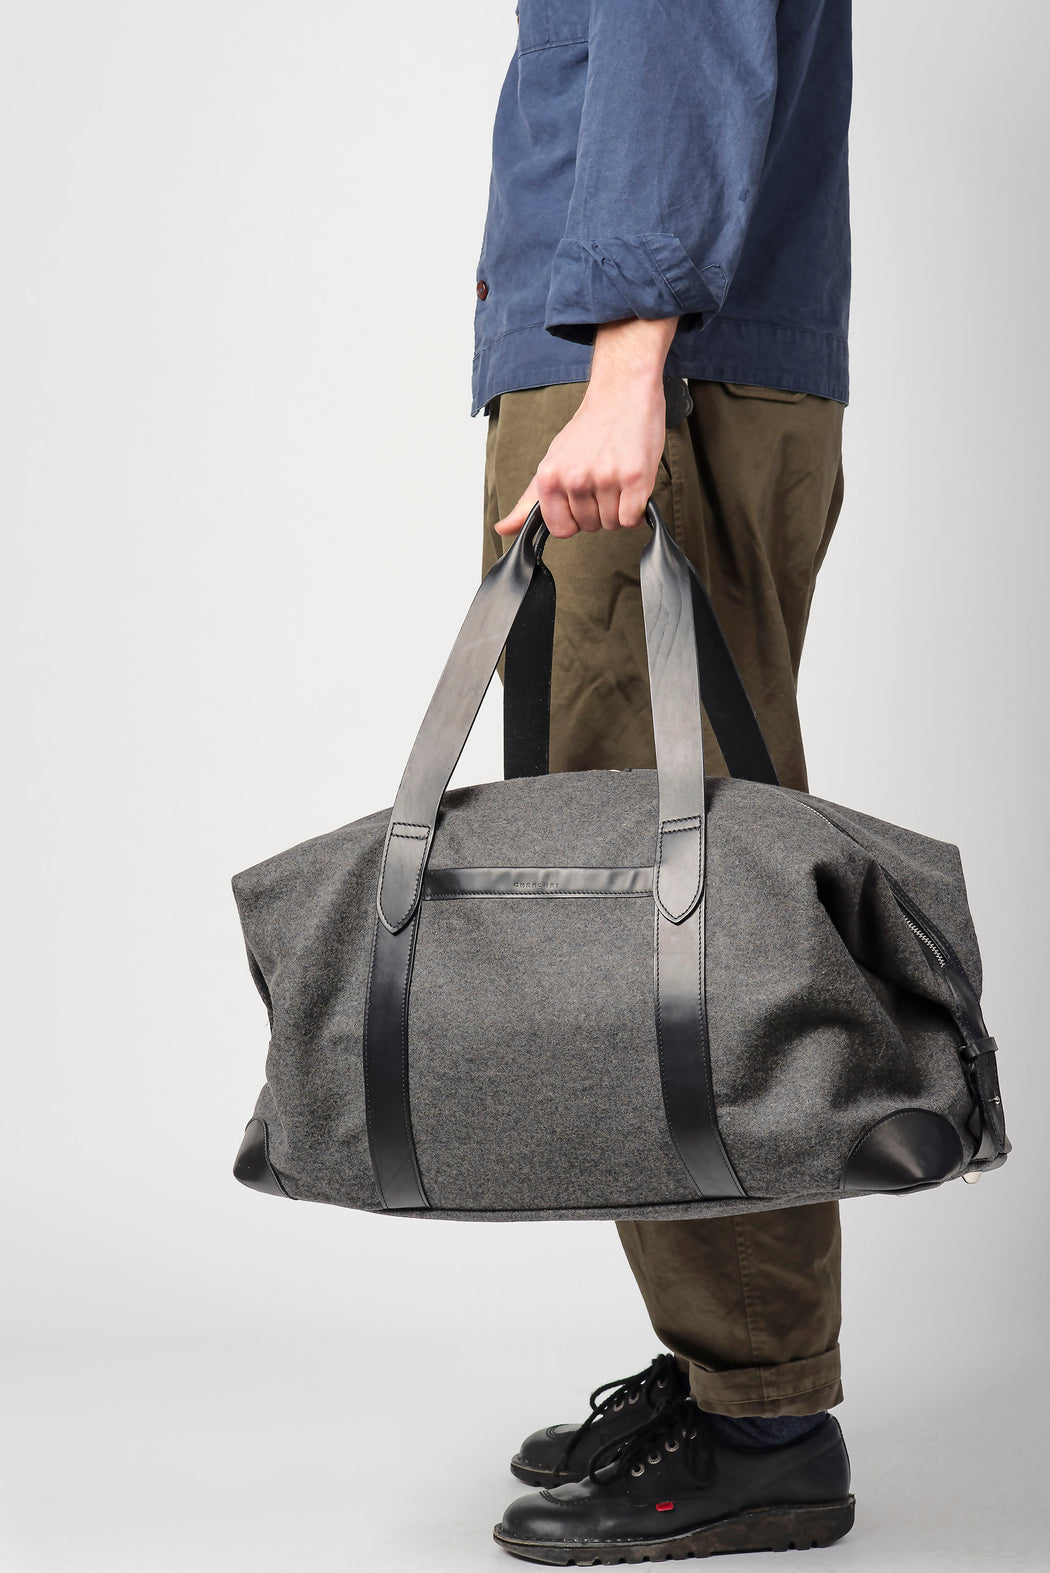 Squires Holdall Large